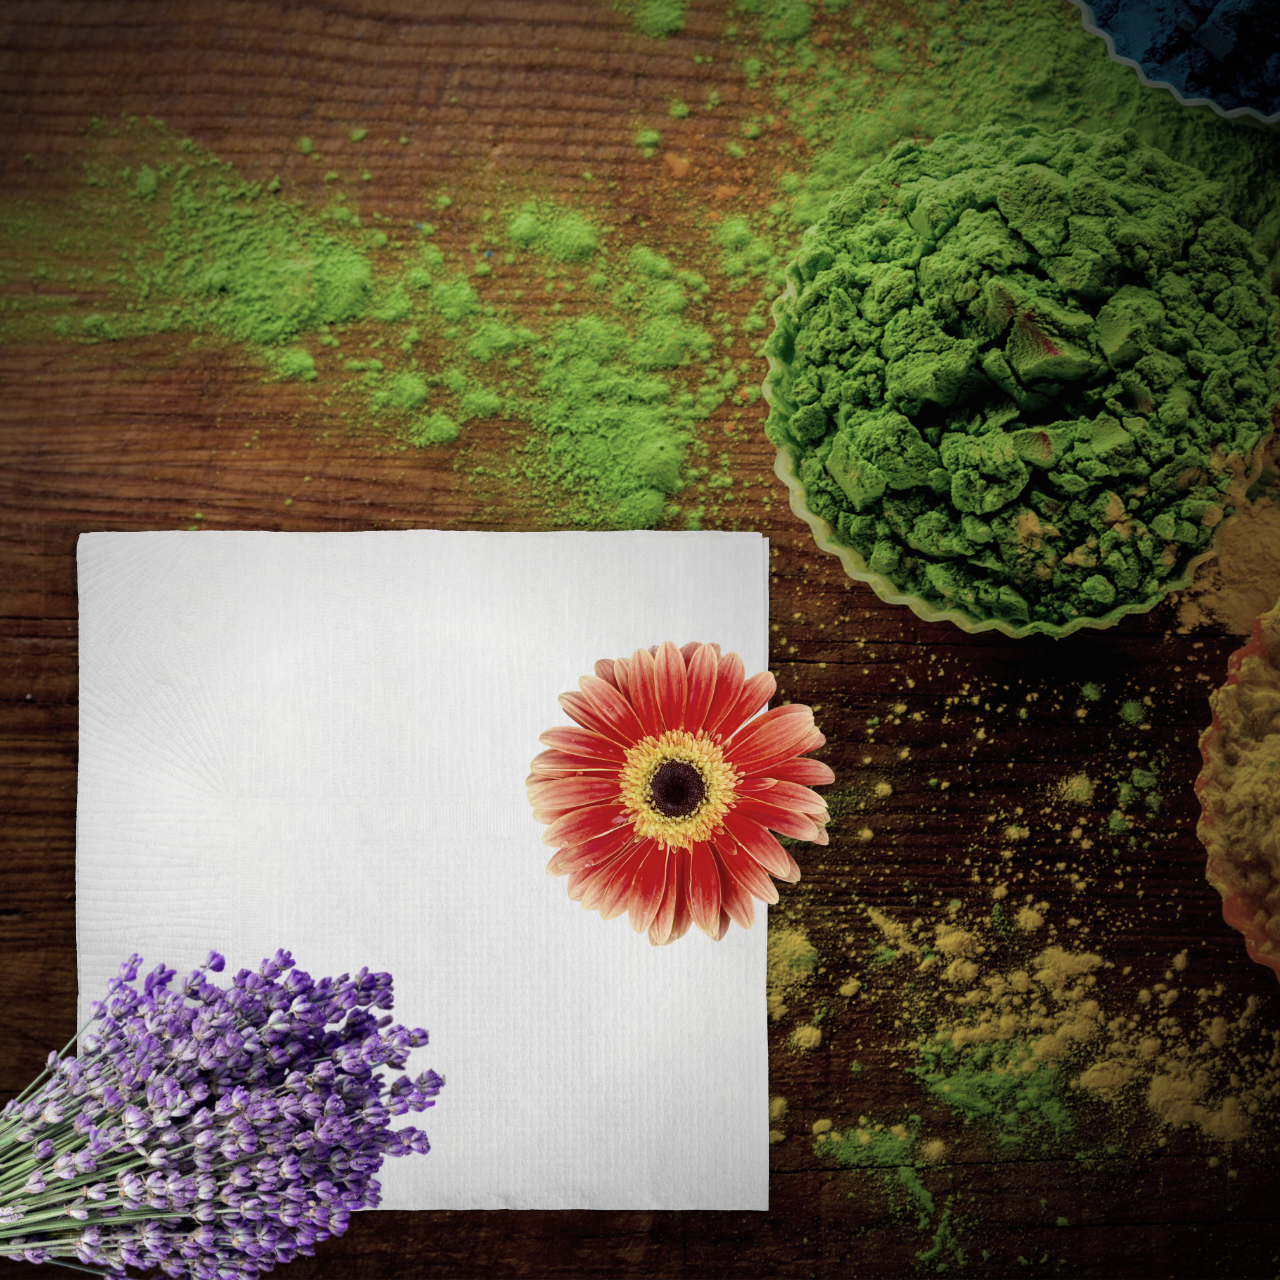 Flowers, pigments, and a napkin on a table